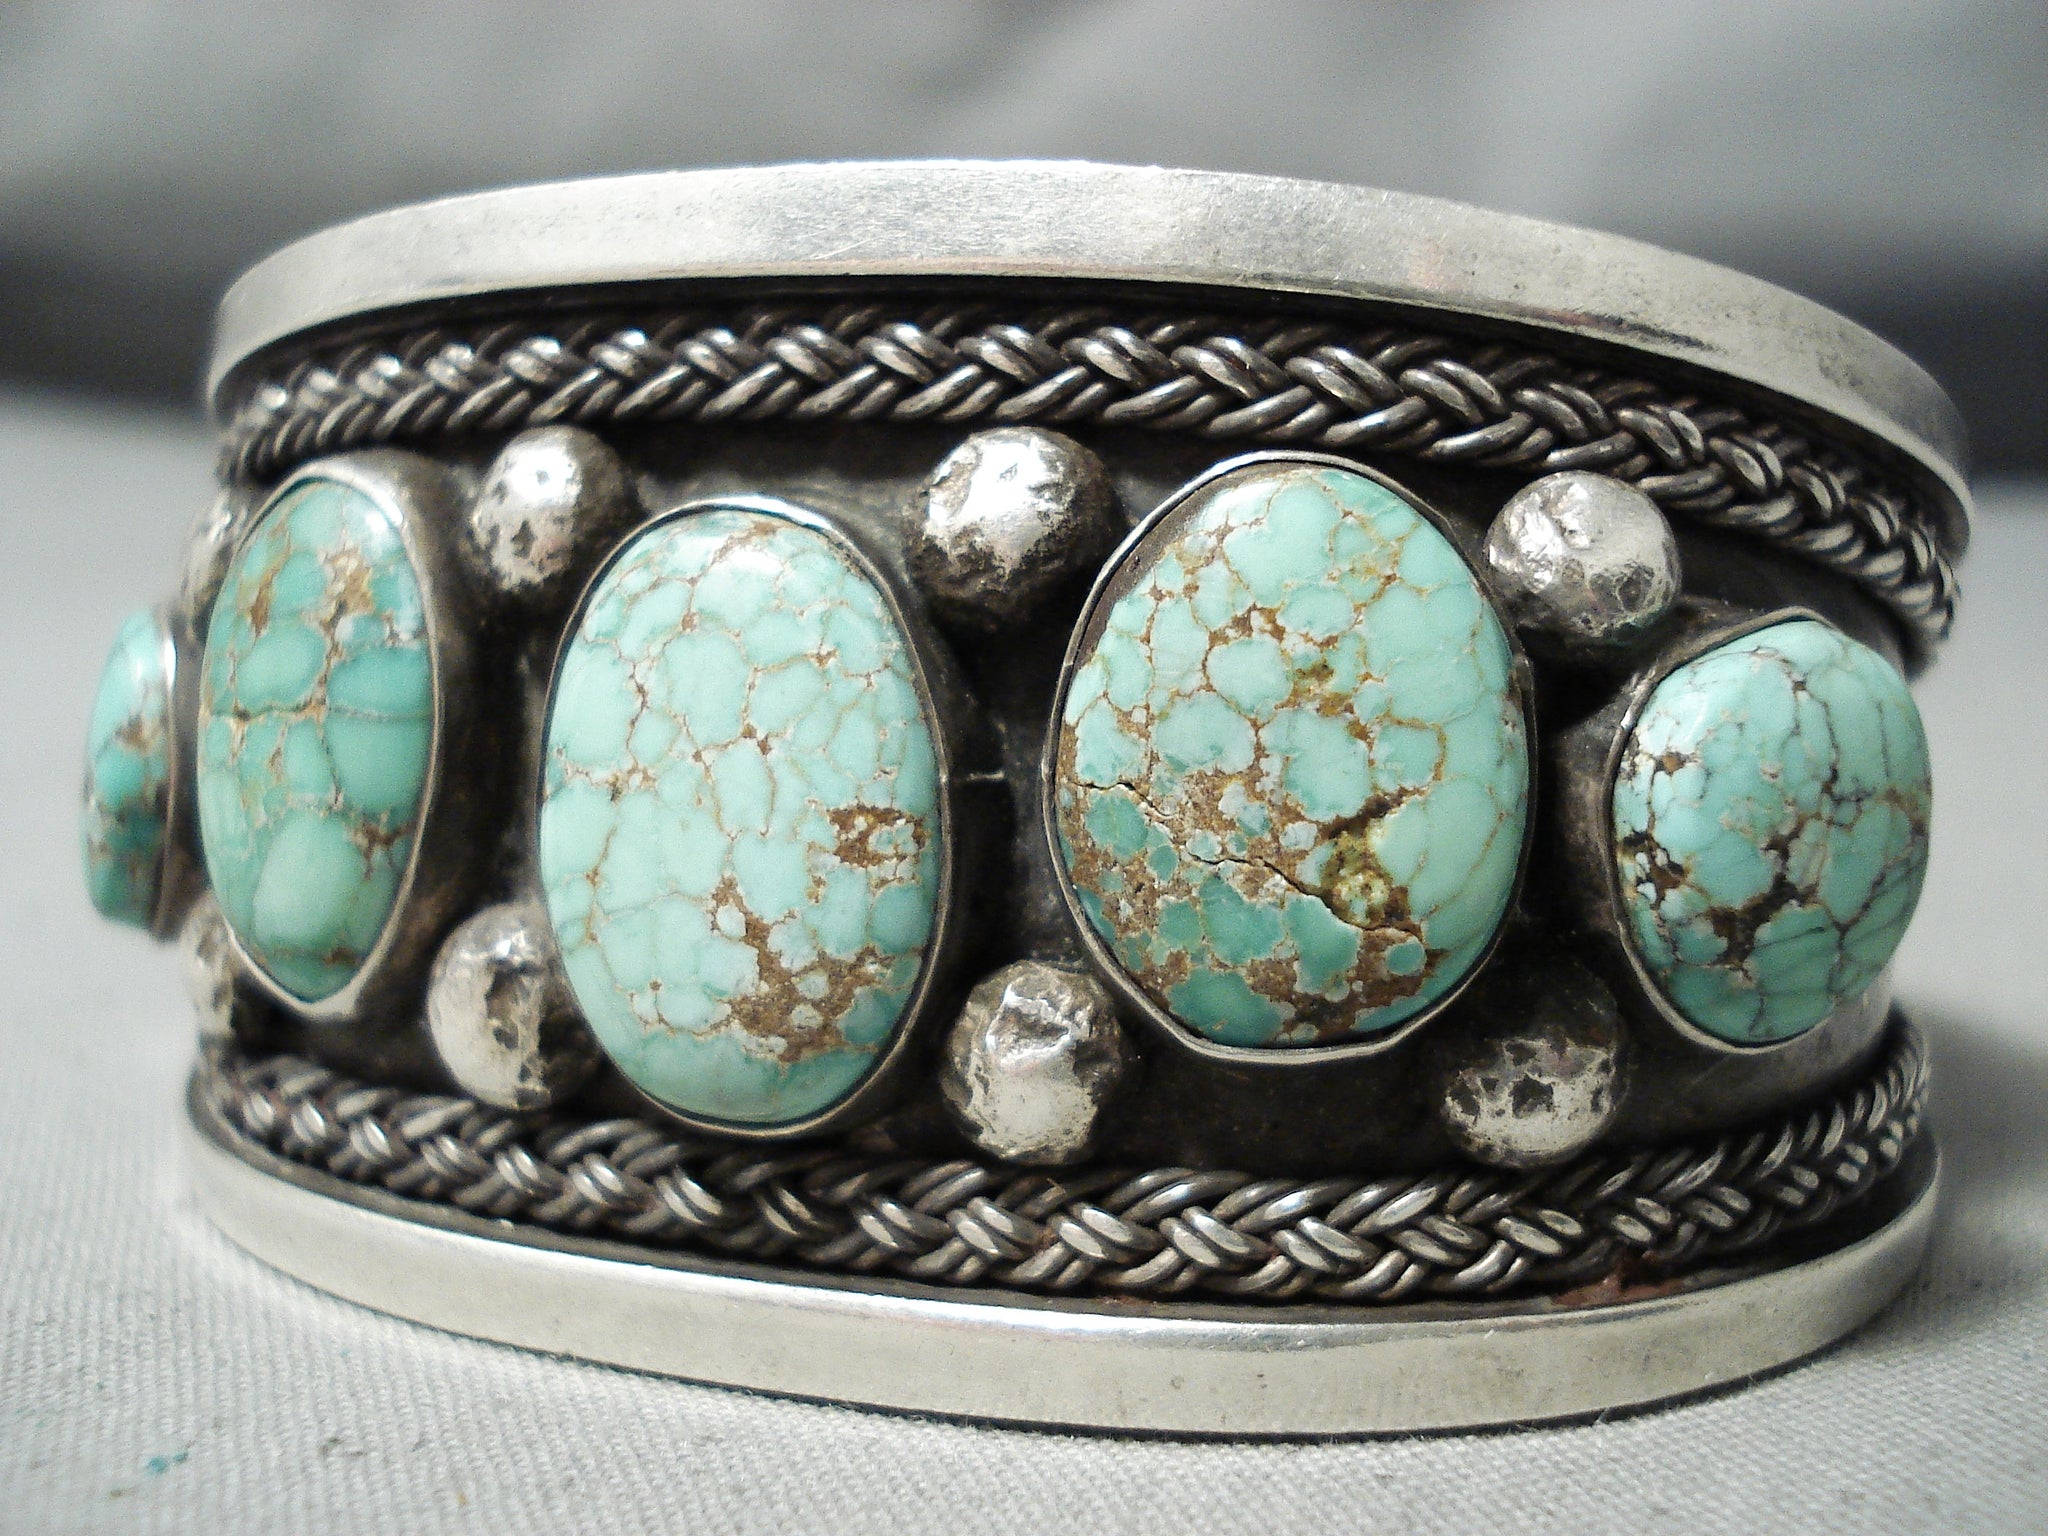 Native American Jewelry: How to identify early Navajo Silversmith Jewelry  Tools – Canyon Road Arts